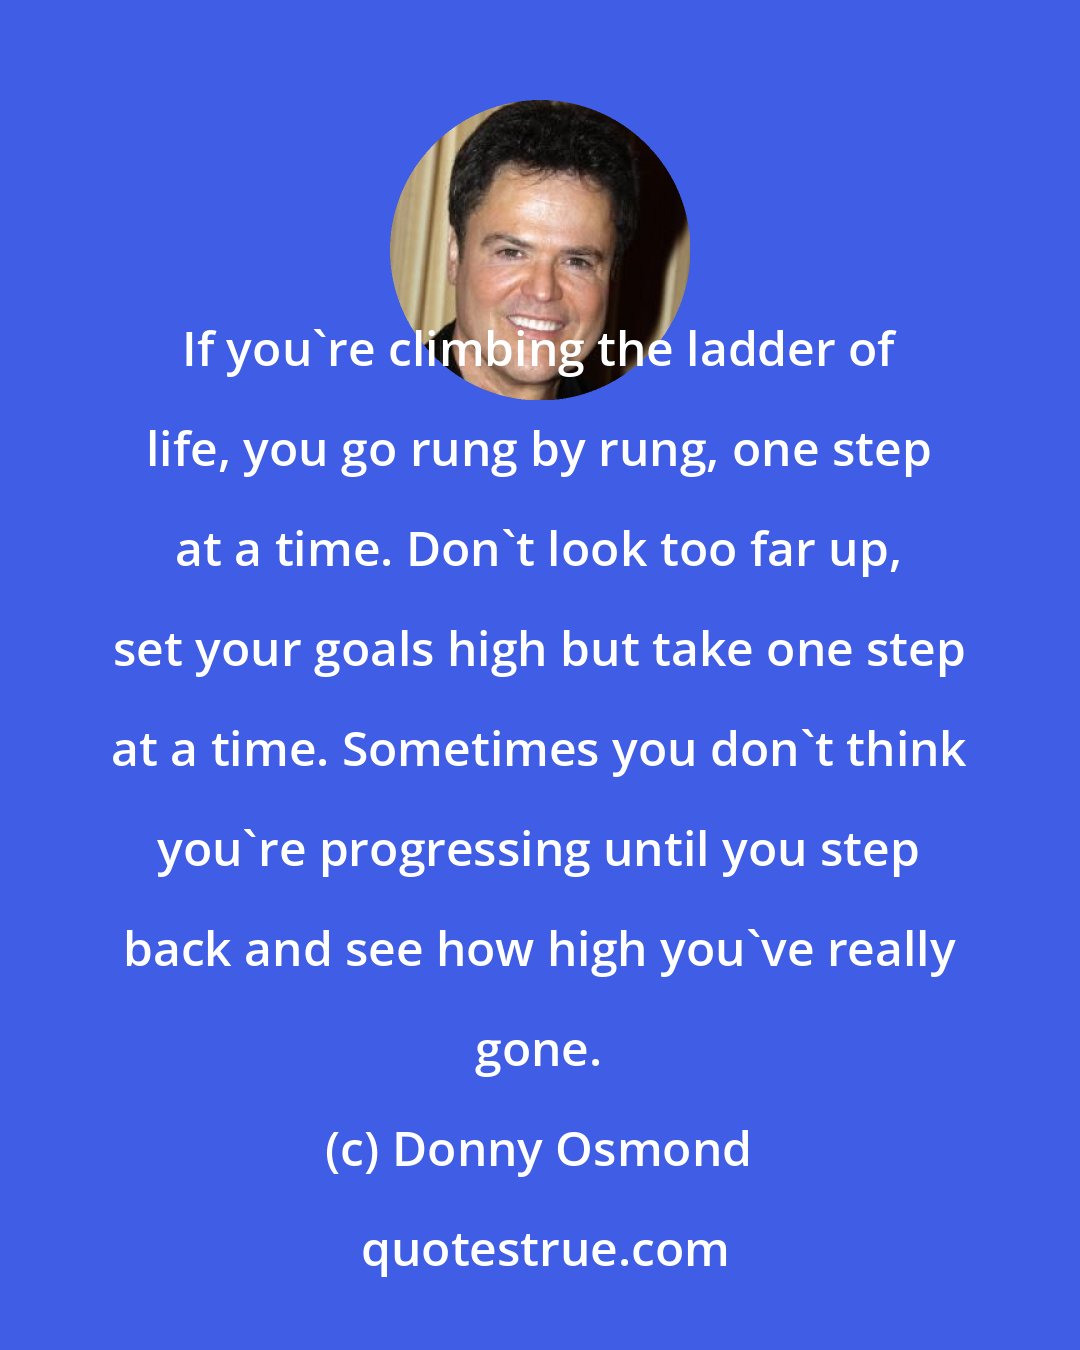 Donny Osmond: If you're climbing the ladder of life, you go rung by rung, one step at a time. Don't look too far up, set your goals high but take one step at a time. Sometimes you don't think you're progressing until you step back and see how high you've really gone.